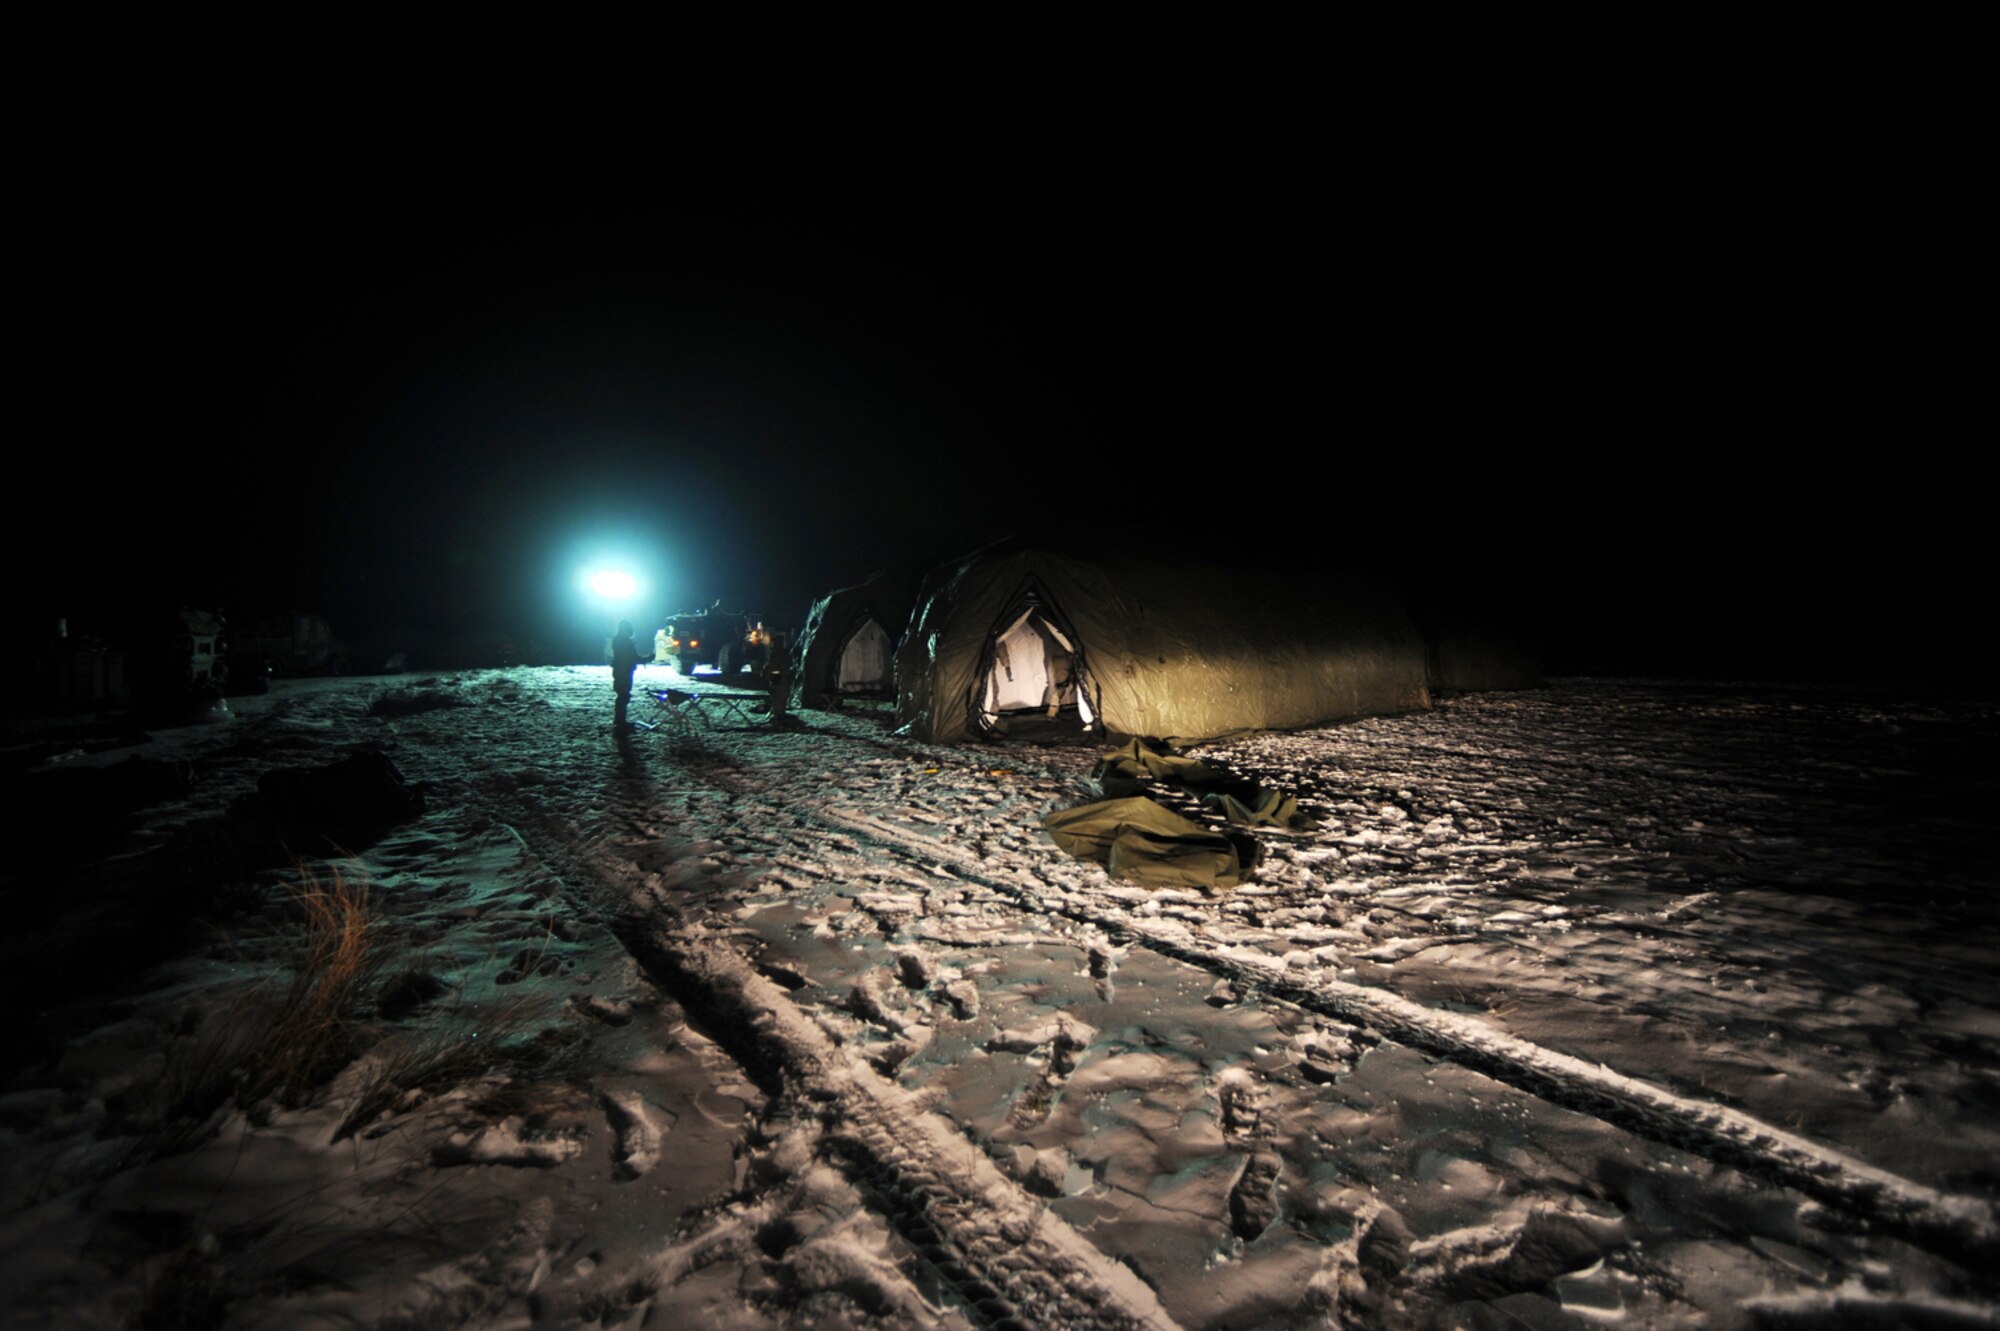 U.S. Air Force members set up tents after their arrival at Flugplatz Bitburg, Germany, Jan. 26, 2010, in preparation of Ramstein's operational readiness inspection in September. The units are setting up bare-base operations as part of the dual-wing operational readiness exercise with the 86th Airlift Wing. This is the second of five operational readiness exercises. (U.S. Air Force photo by Staff Sgt. Sarayuth Pinthong)